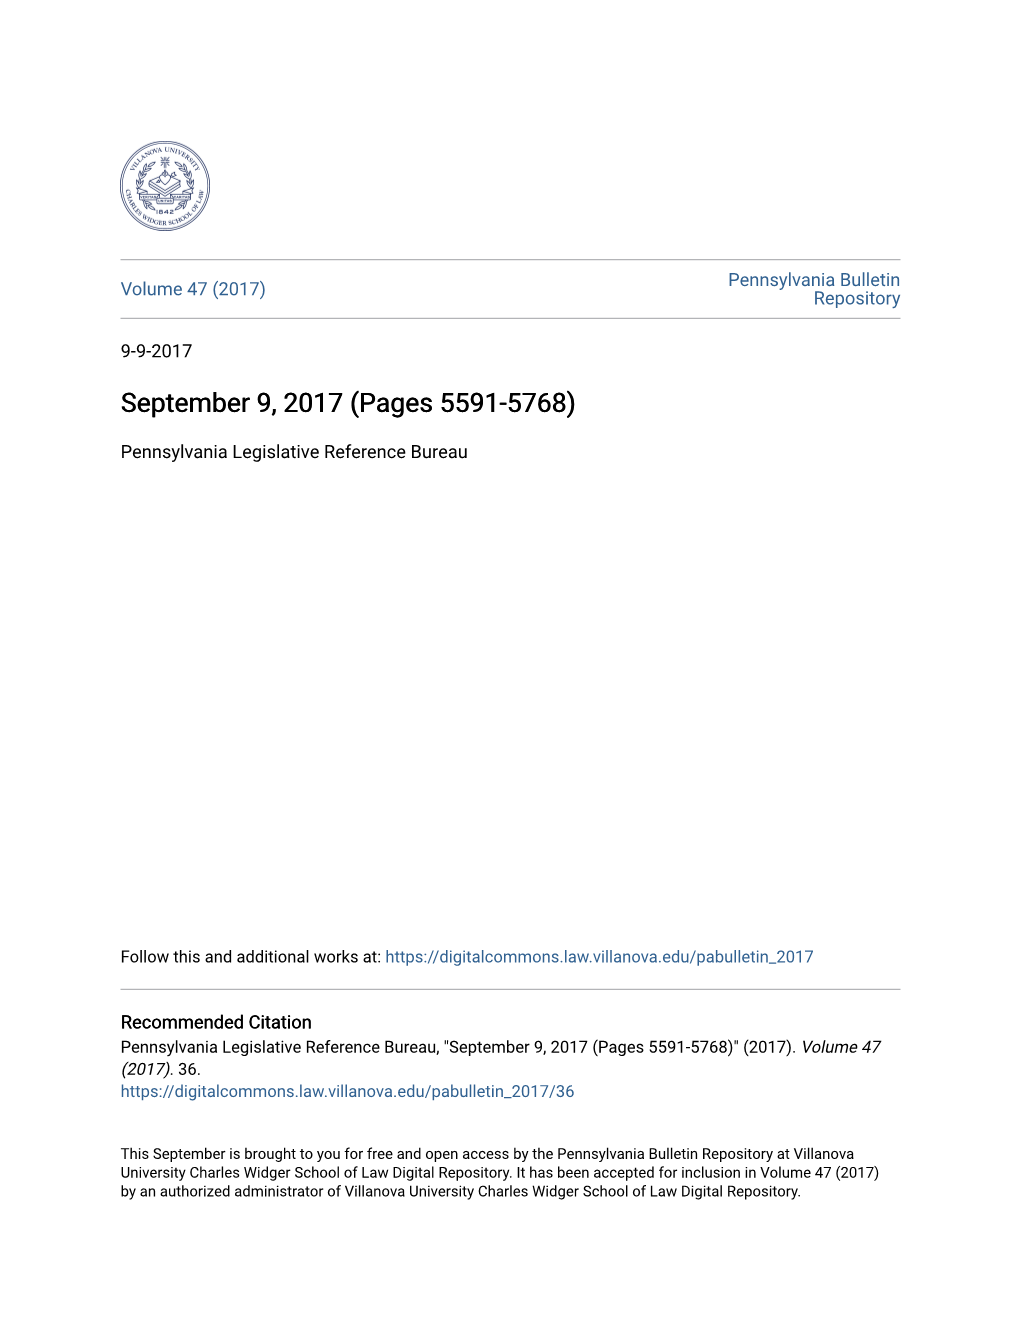 September 9, 2017 (Pages 5591-5768)